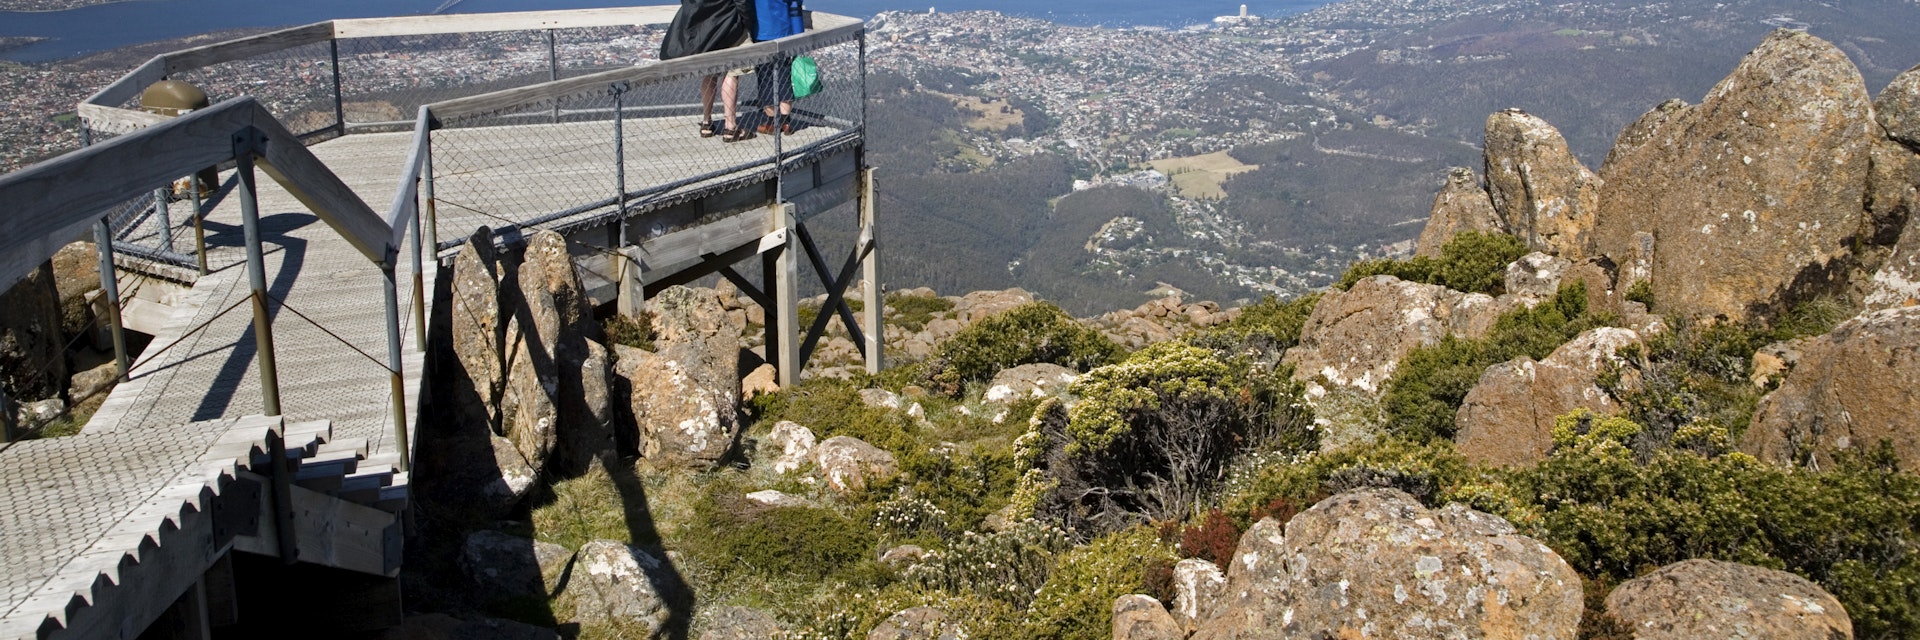 Australia, Tasmania, Hobart. Tourists take in the spectaular view of Hobart from the top of Mount Wellington at 1271m.